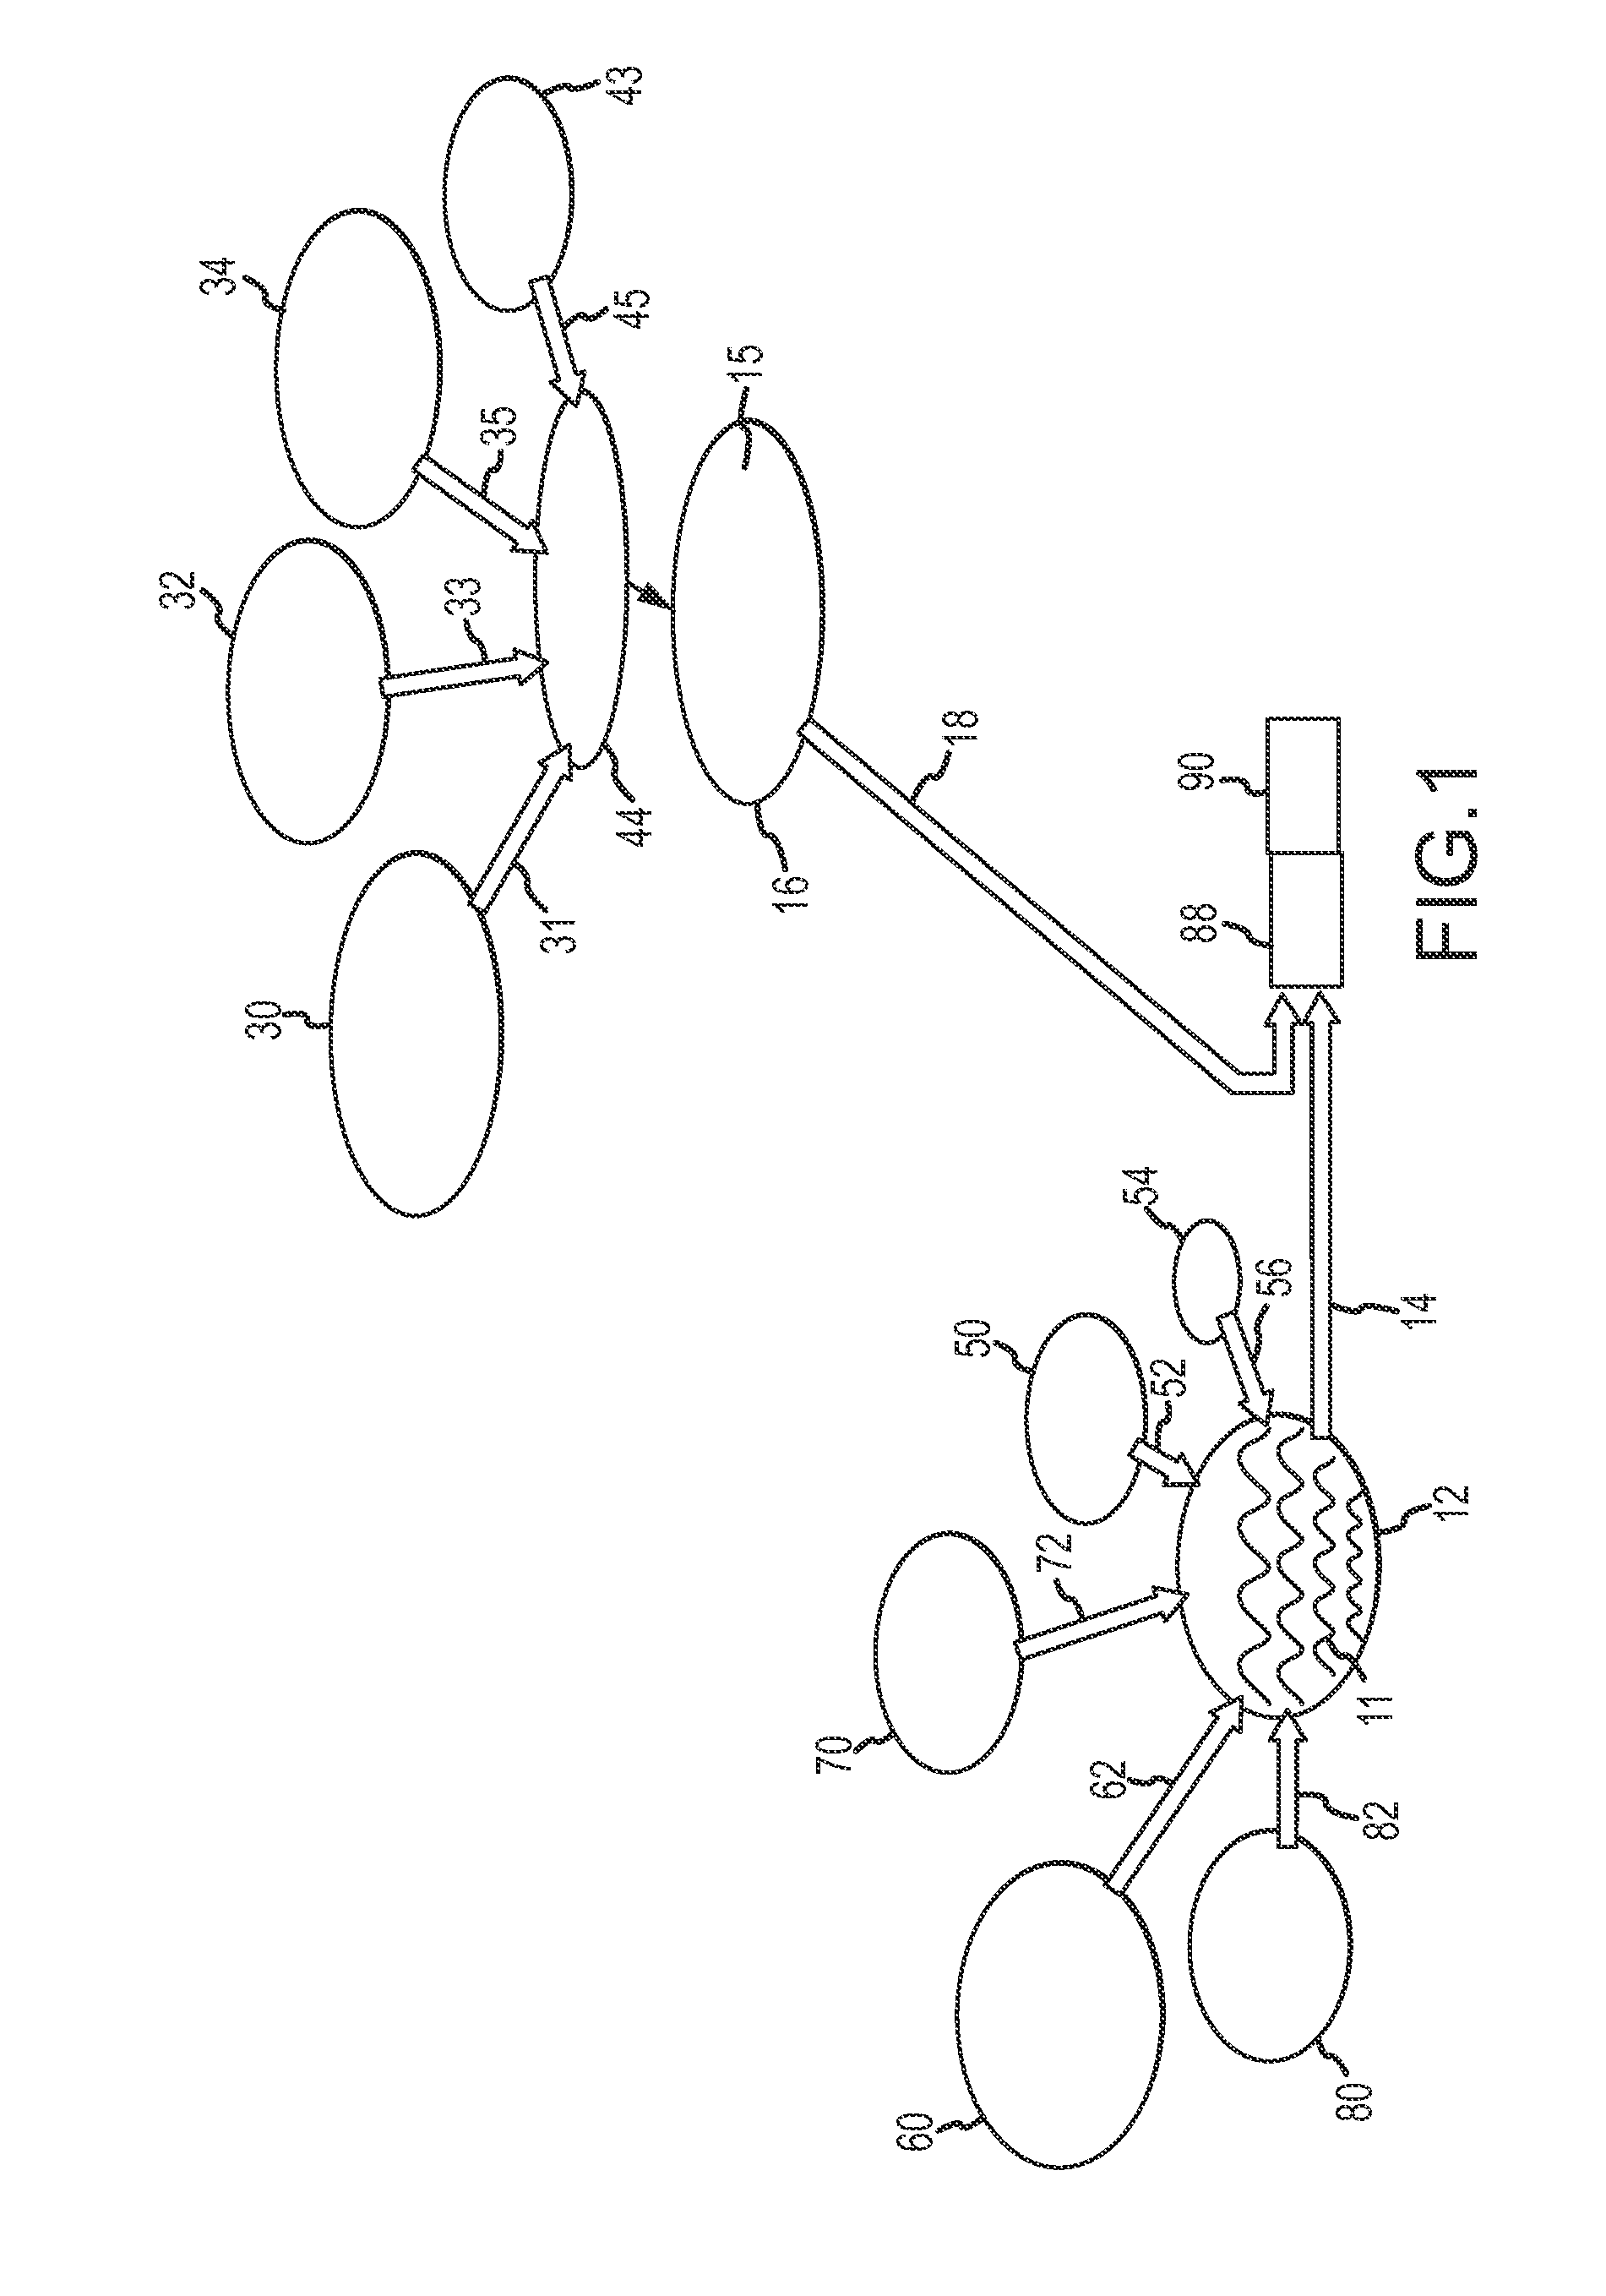 Phase change material-containing composition and related products and methods